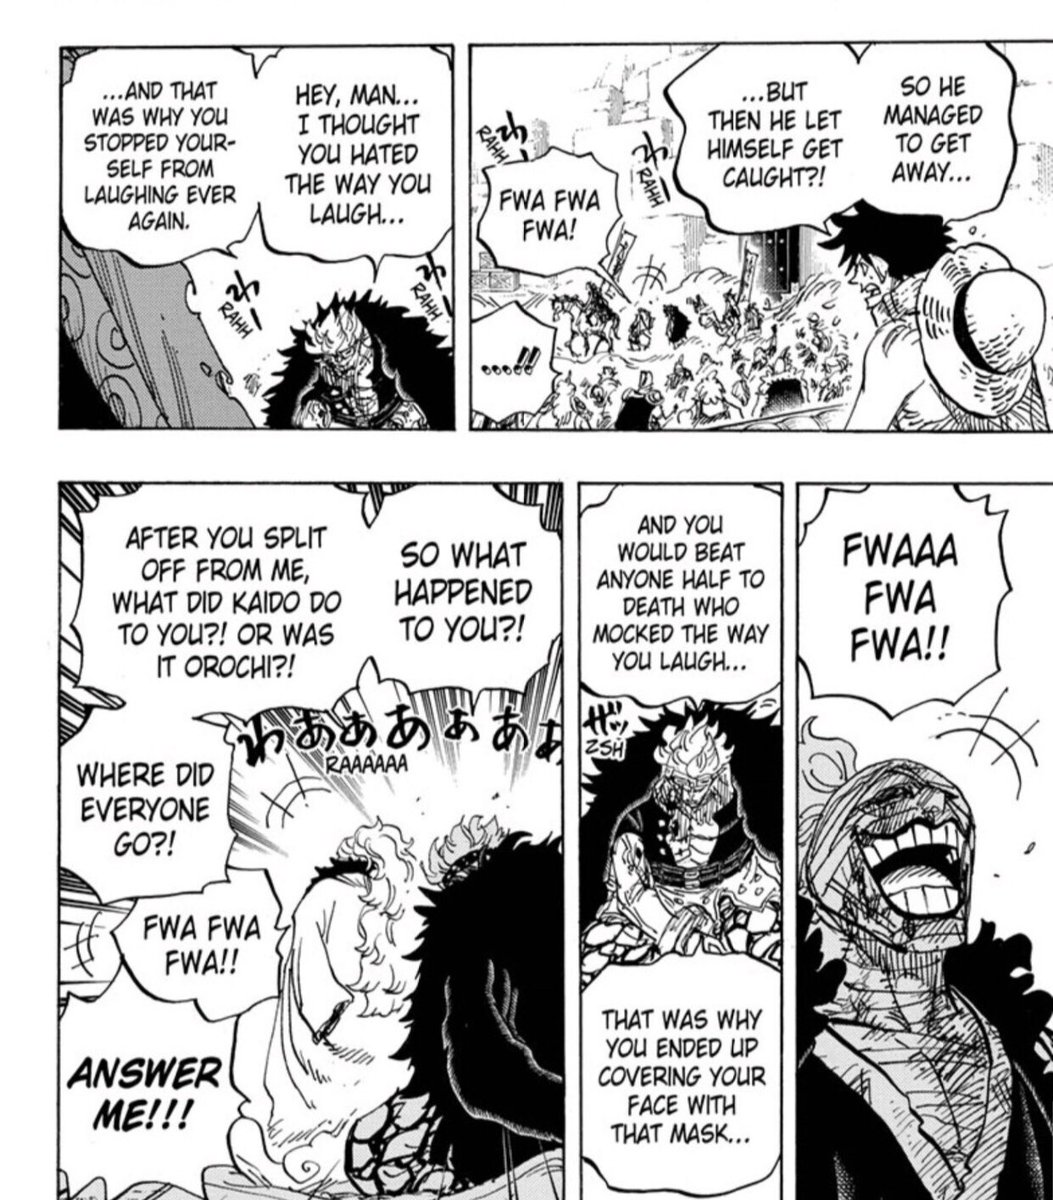 Based off Kid’s ruthless nature and cynical view of the world, he must have had a harsh childhood growing up. Oda has been slowly but surely setting up Kid’s tragic backstory.